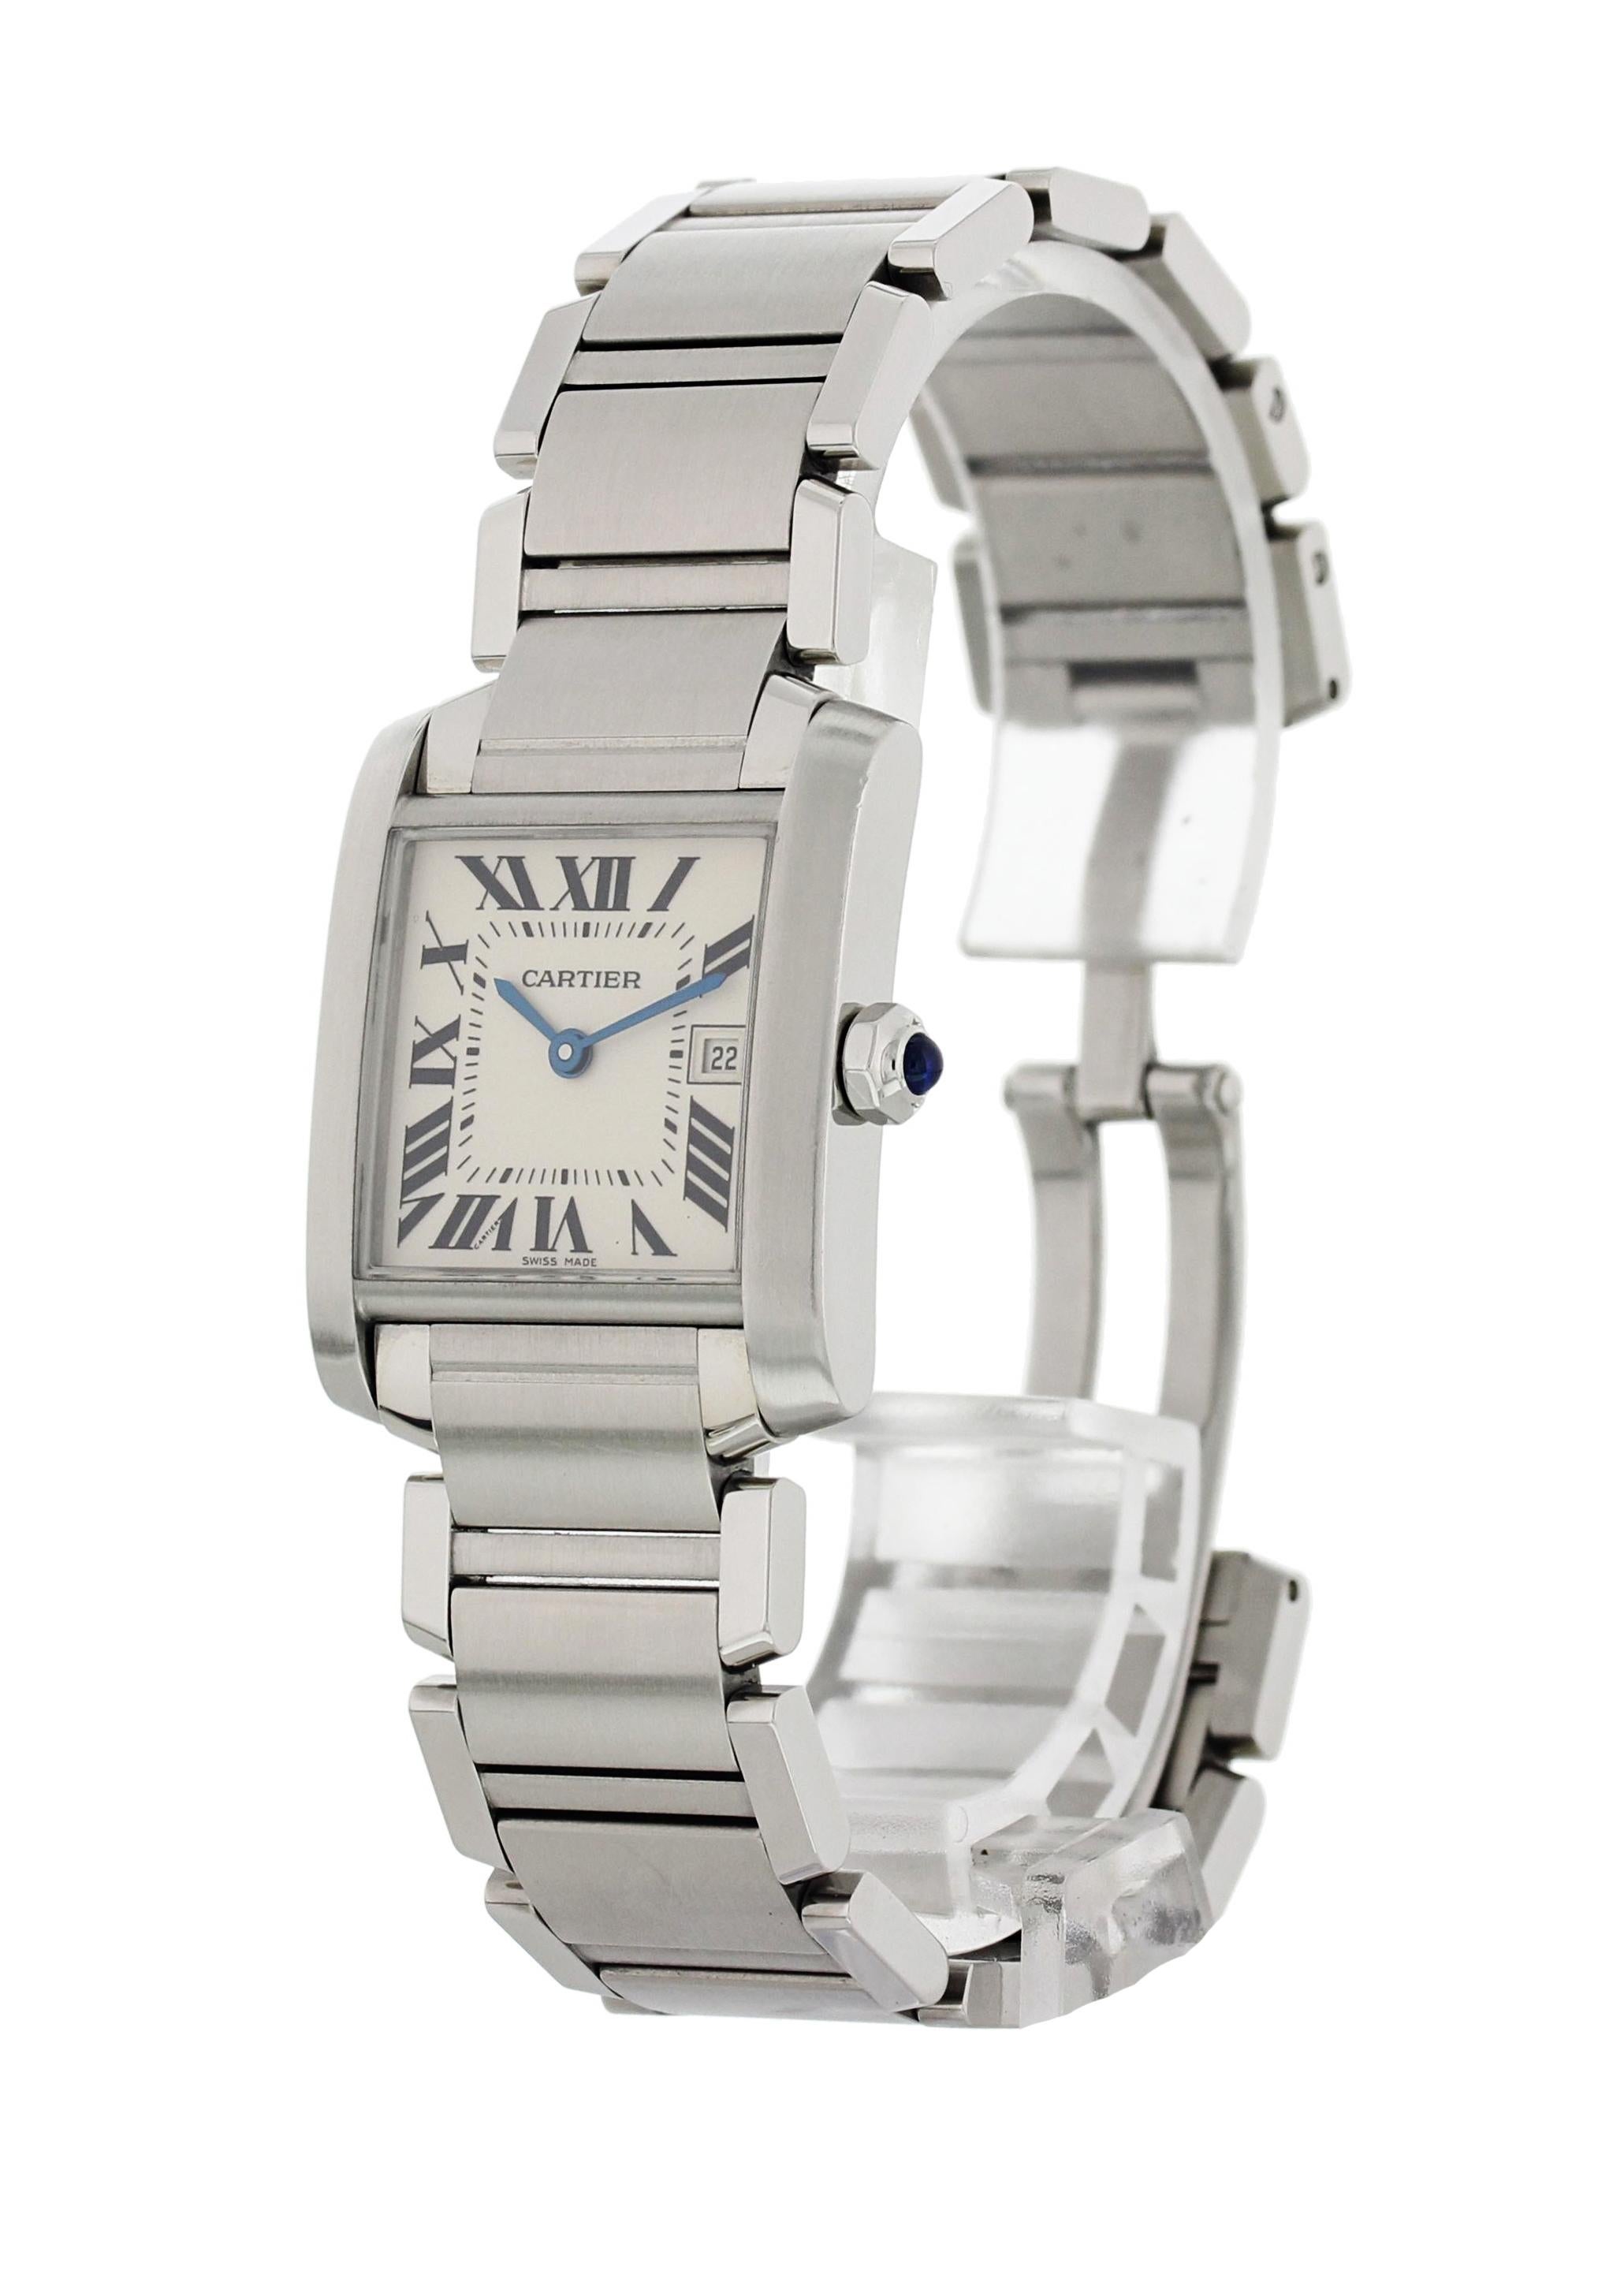 Cartier Tank Francaise 2465 Mid Size Watch. 25mm stainless steel case. Ivory dial with blue steel hands and black Roman numerals markers. Date aperture at the 3 o'clock position. Stainless steel bracelet with hidden butterfly clasp. Will fit a